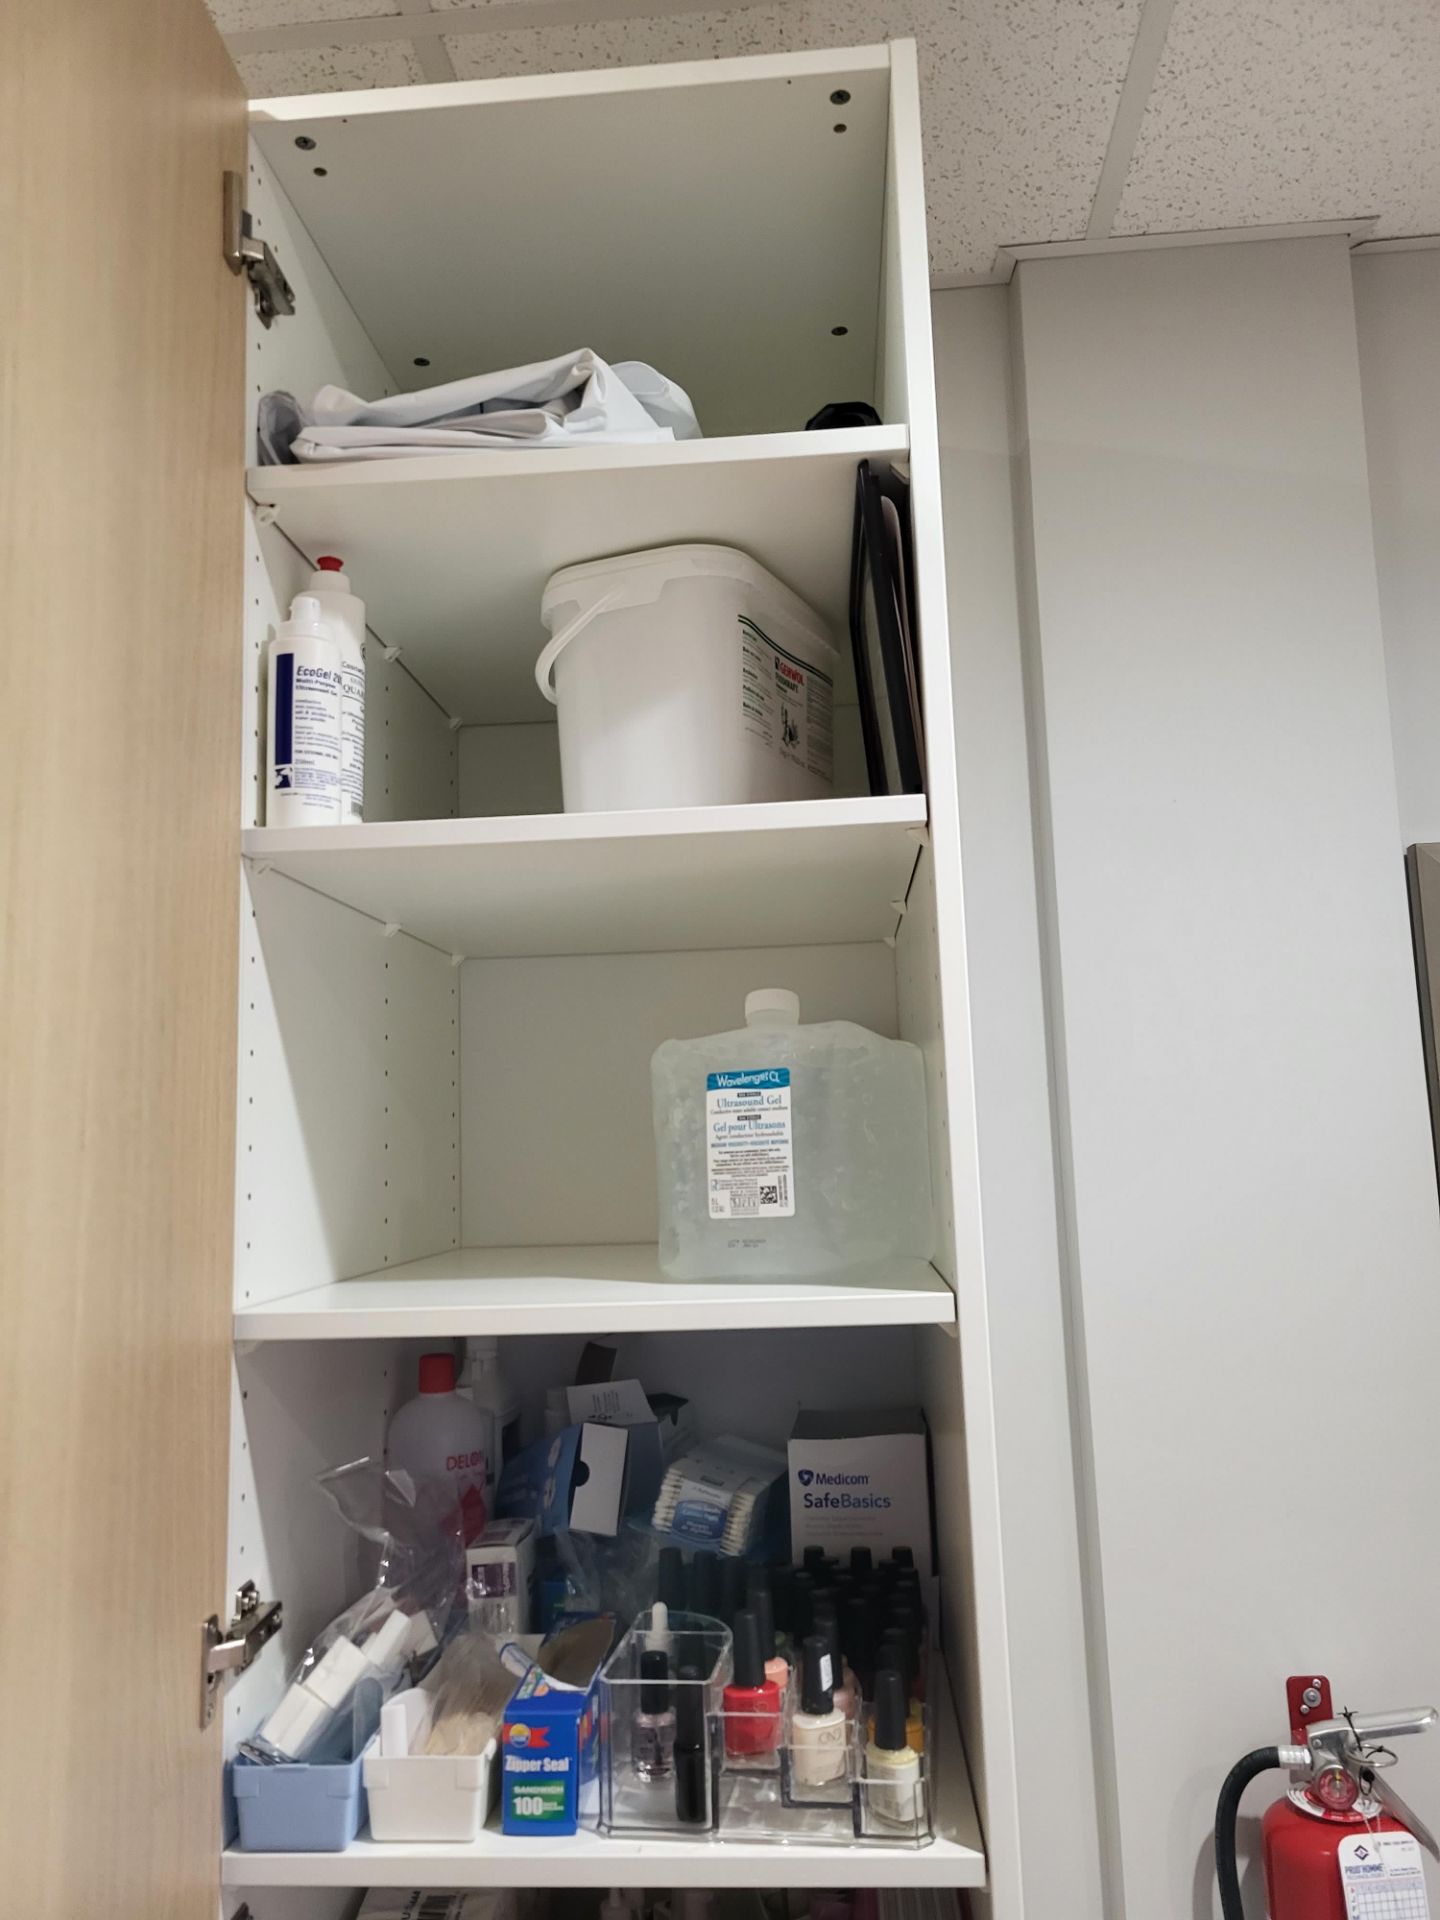 Contents of Cabinet Section - Image 2 of 2